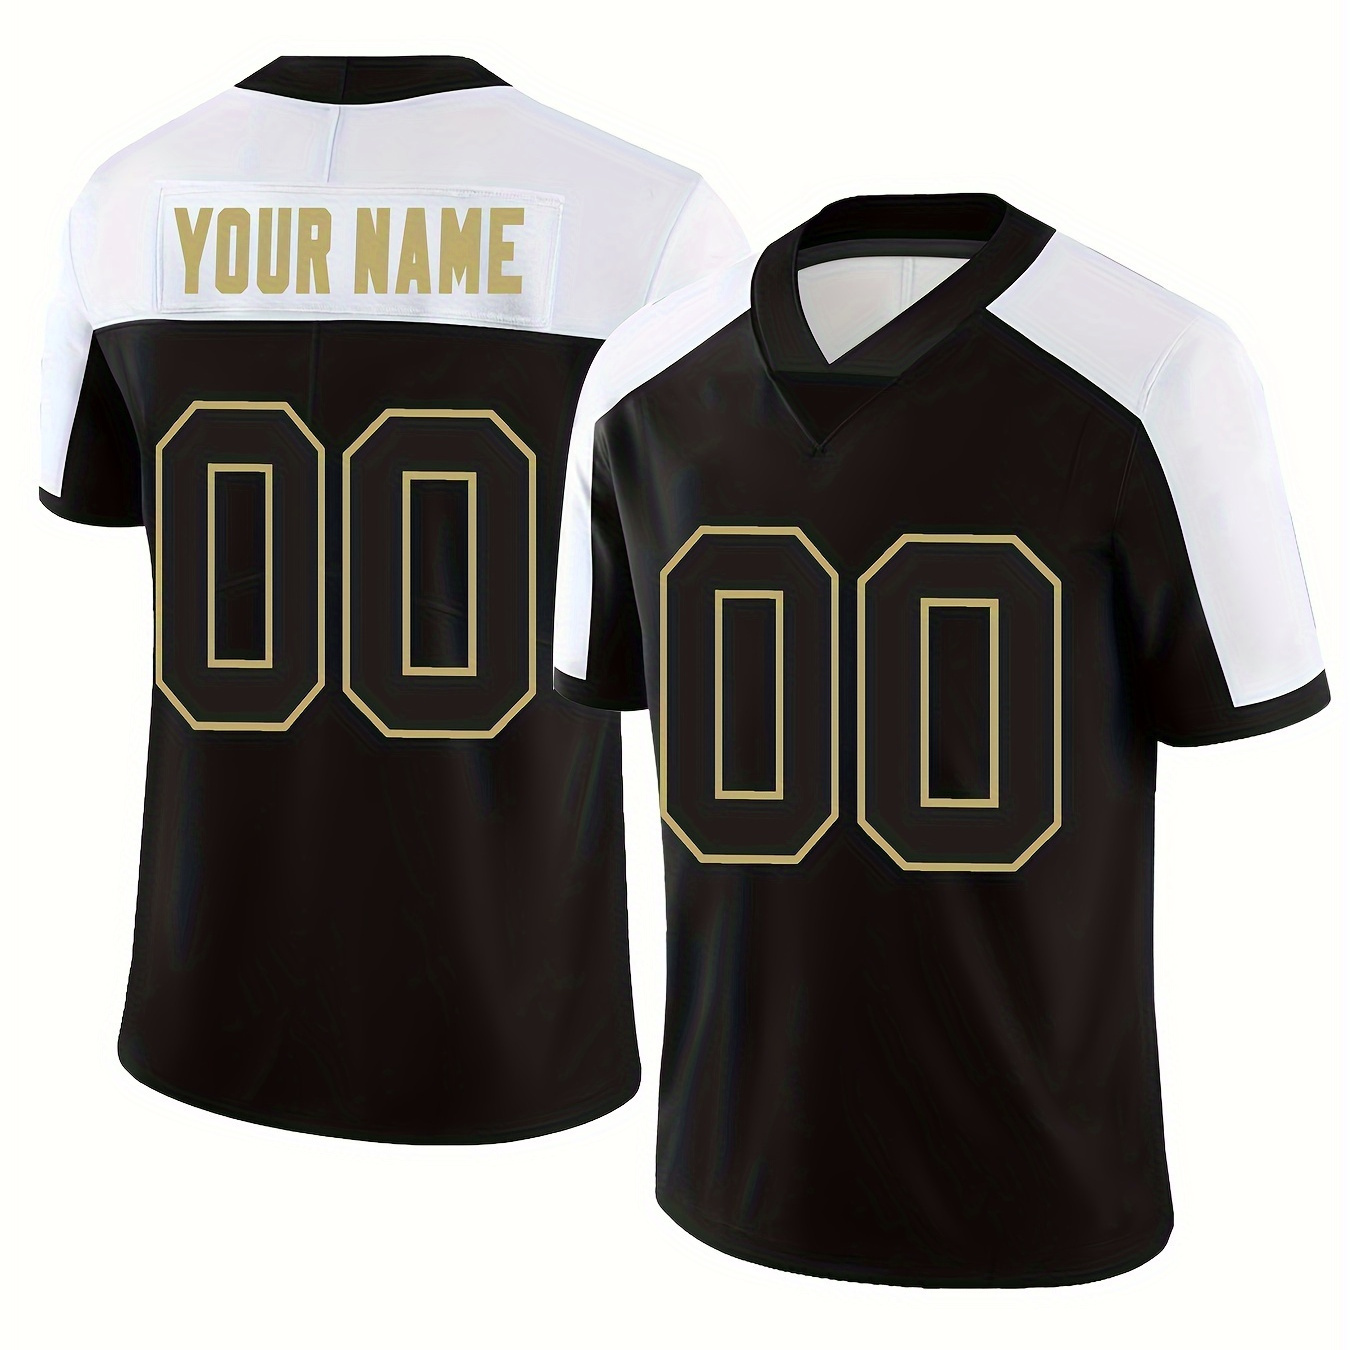 

Customized Name And Number Design, Men's Color Blocked Short Sleeve Loose V-neck Embroidery Personalized American Football Jersey, Outdoor Rugby Jersey For Team Training